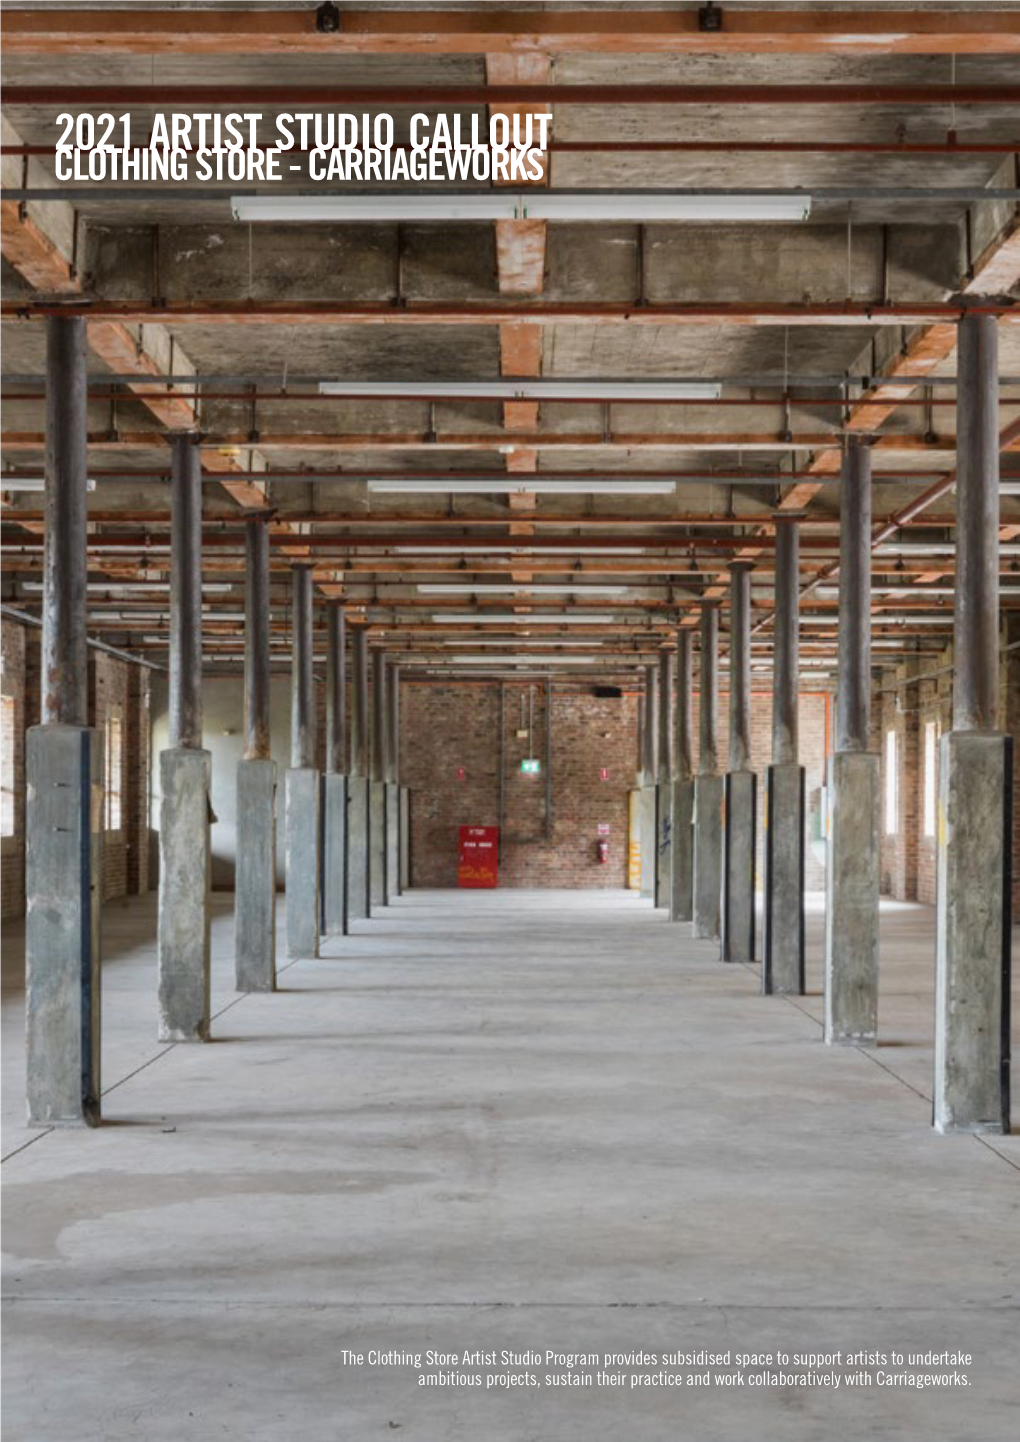 2021 Artist Studio Callout Clothing Store - Carriageworks